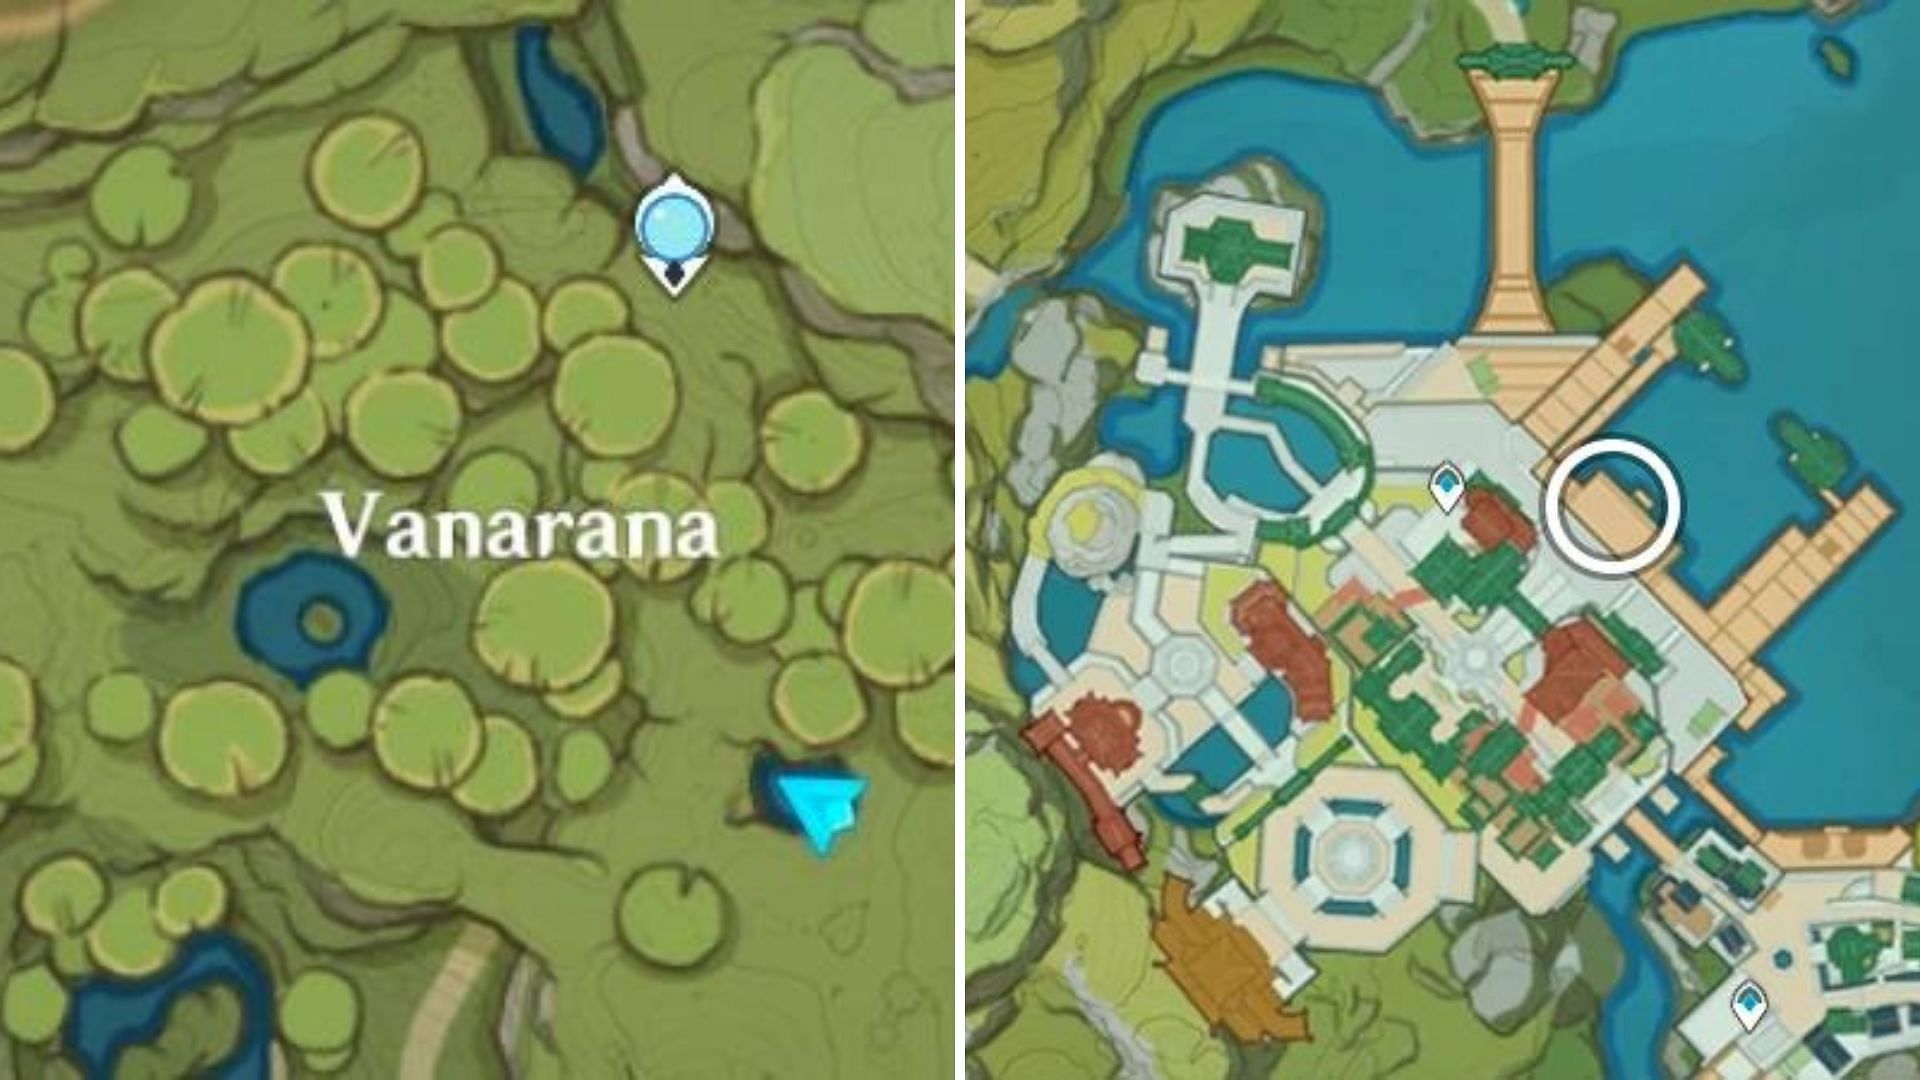 Armani&#039;s location in the left and Bolai&#039;s in the right side (Image via HoYoverse)